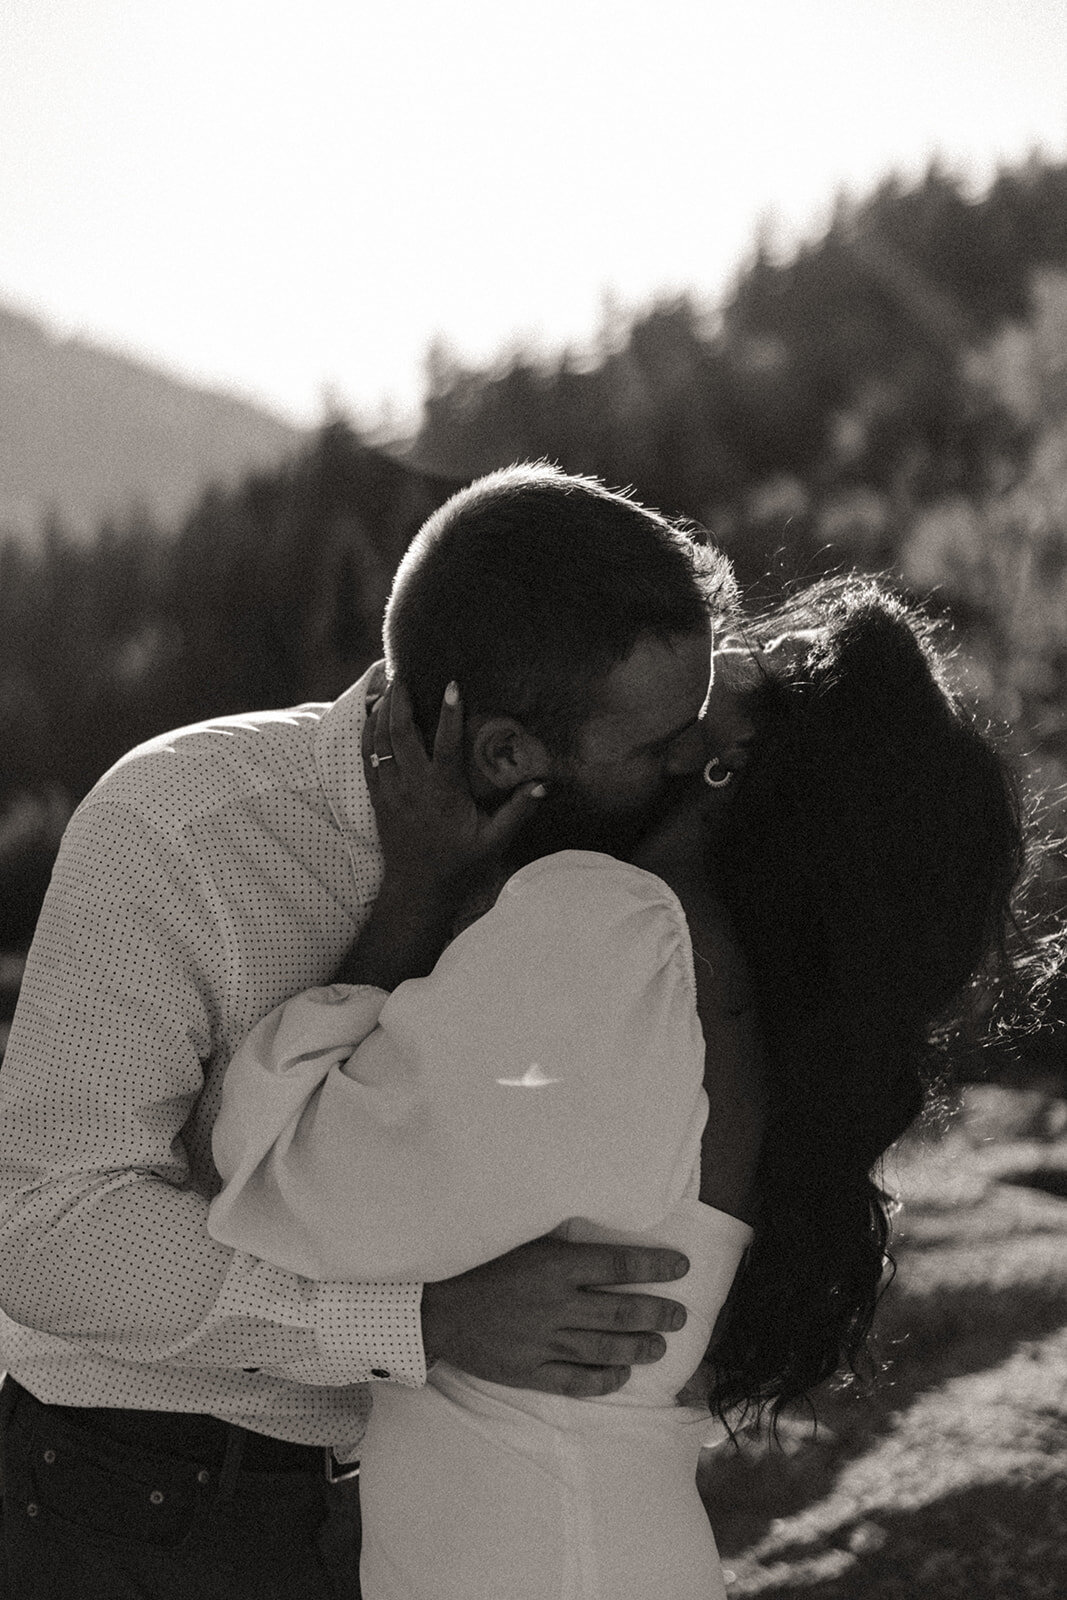 Engagement Photos in the White Mountains, NH | Sydney Kerbyson Photography